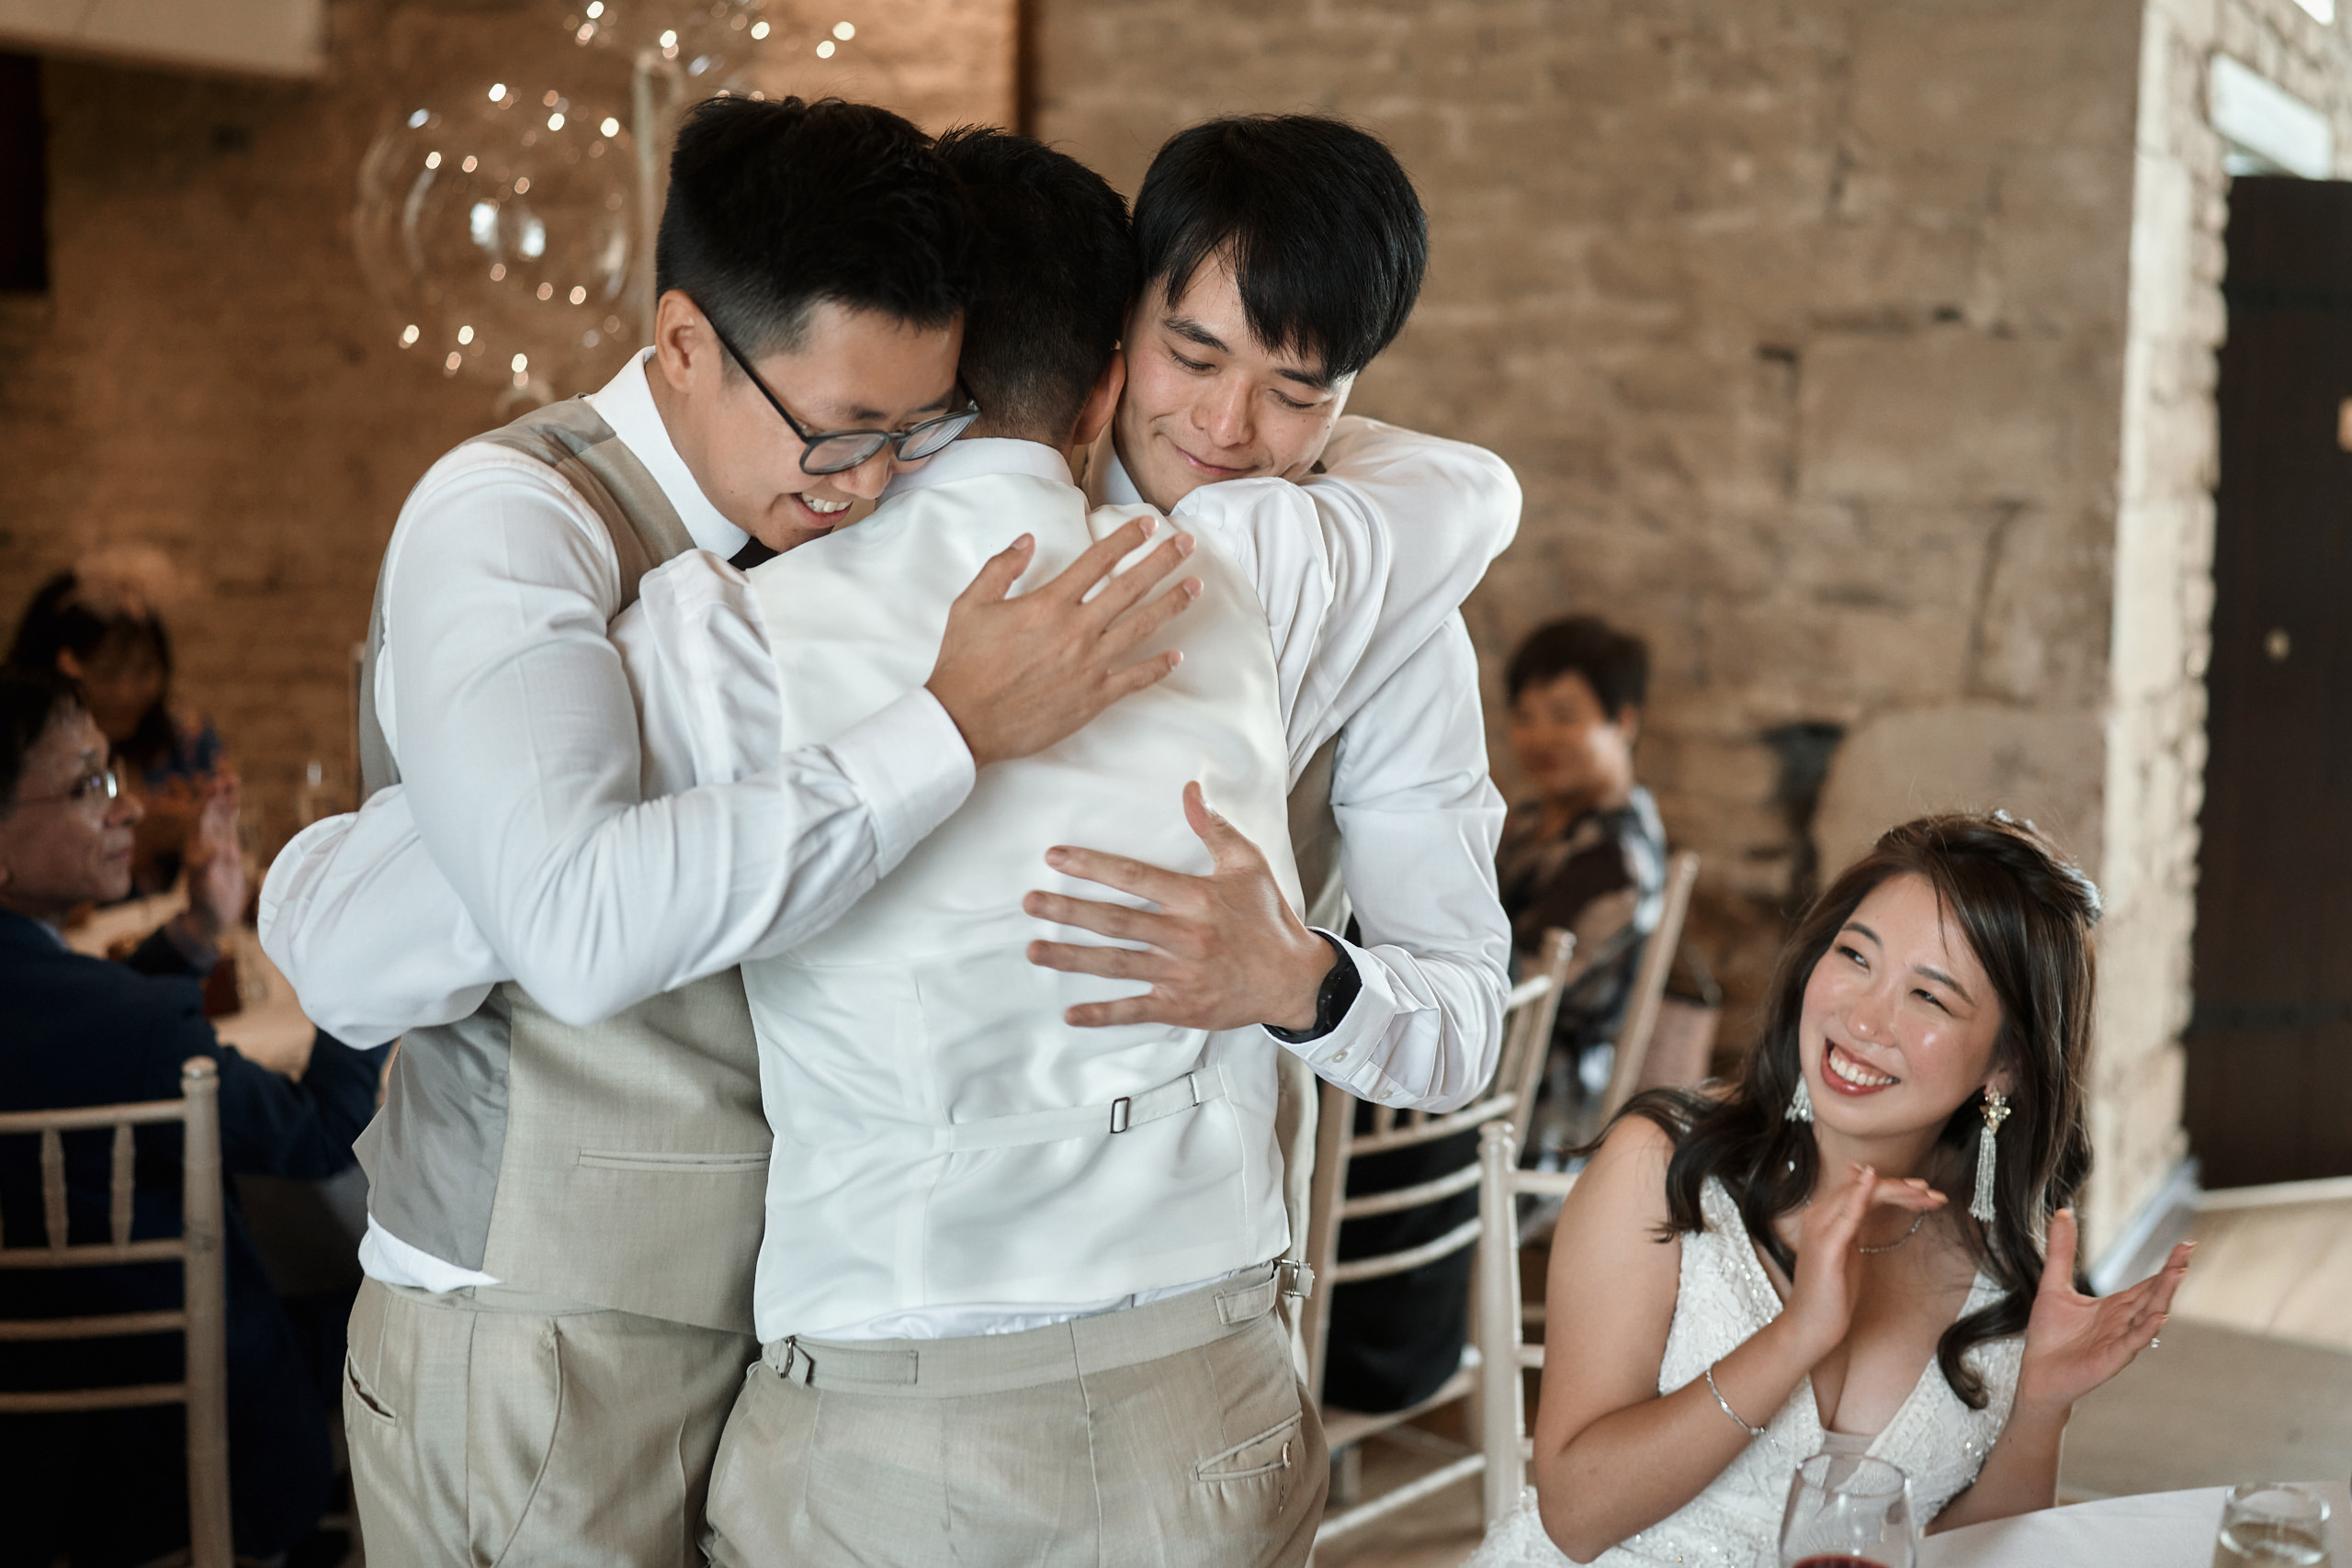 Two guys giving each other a hug at a wedding party.